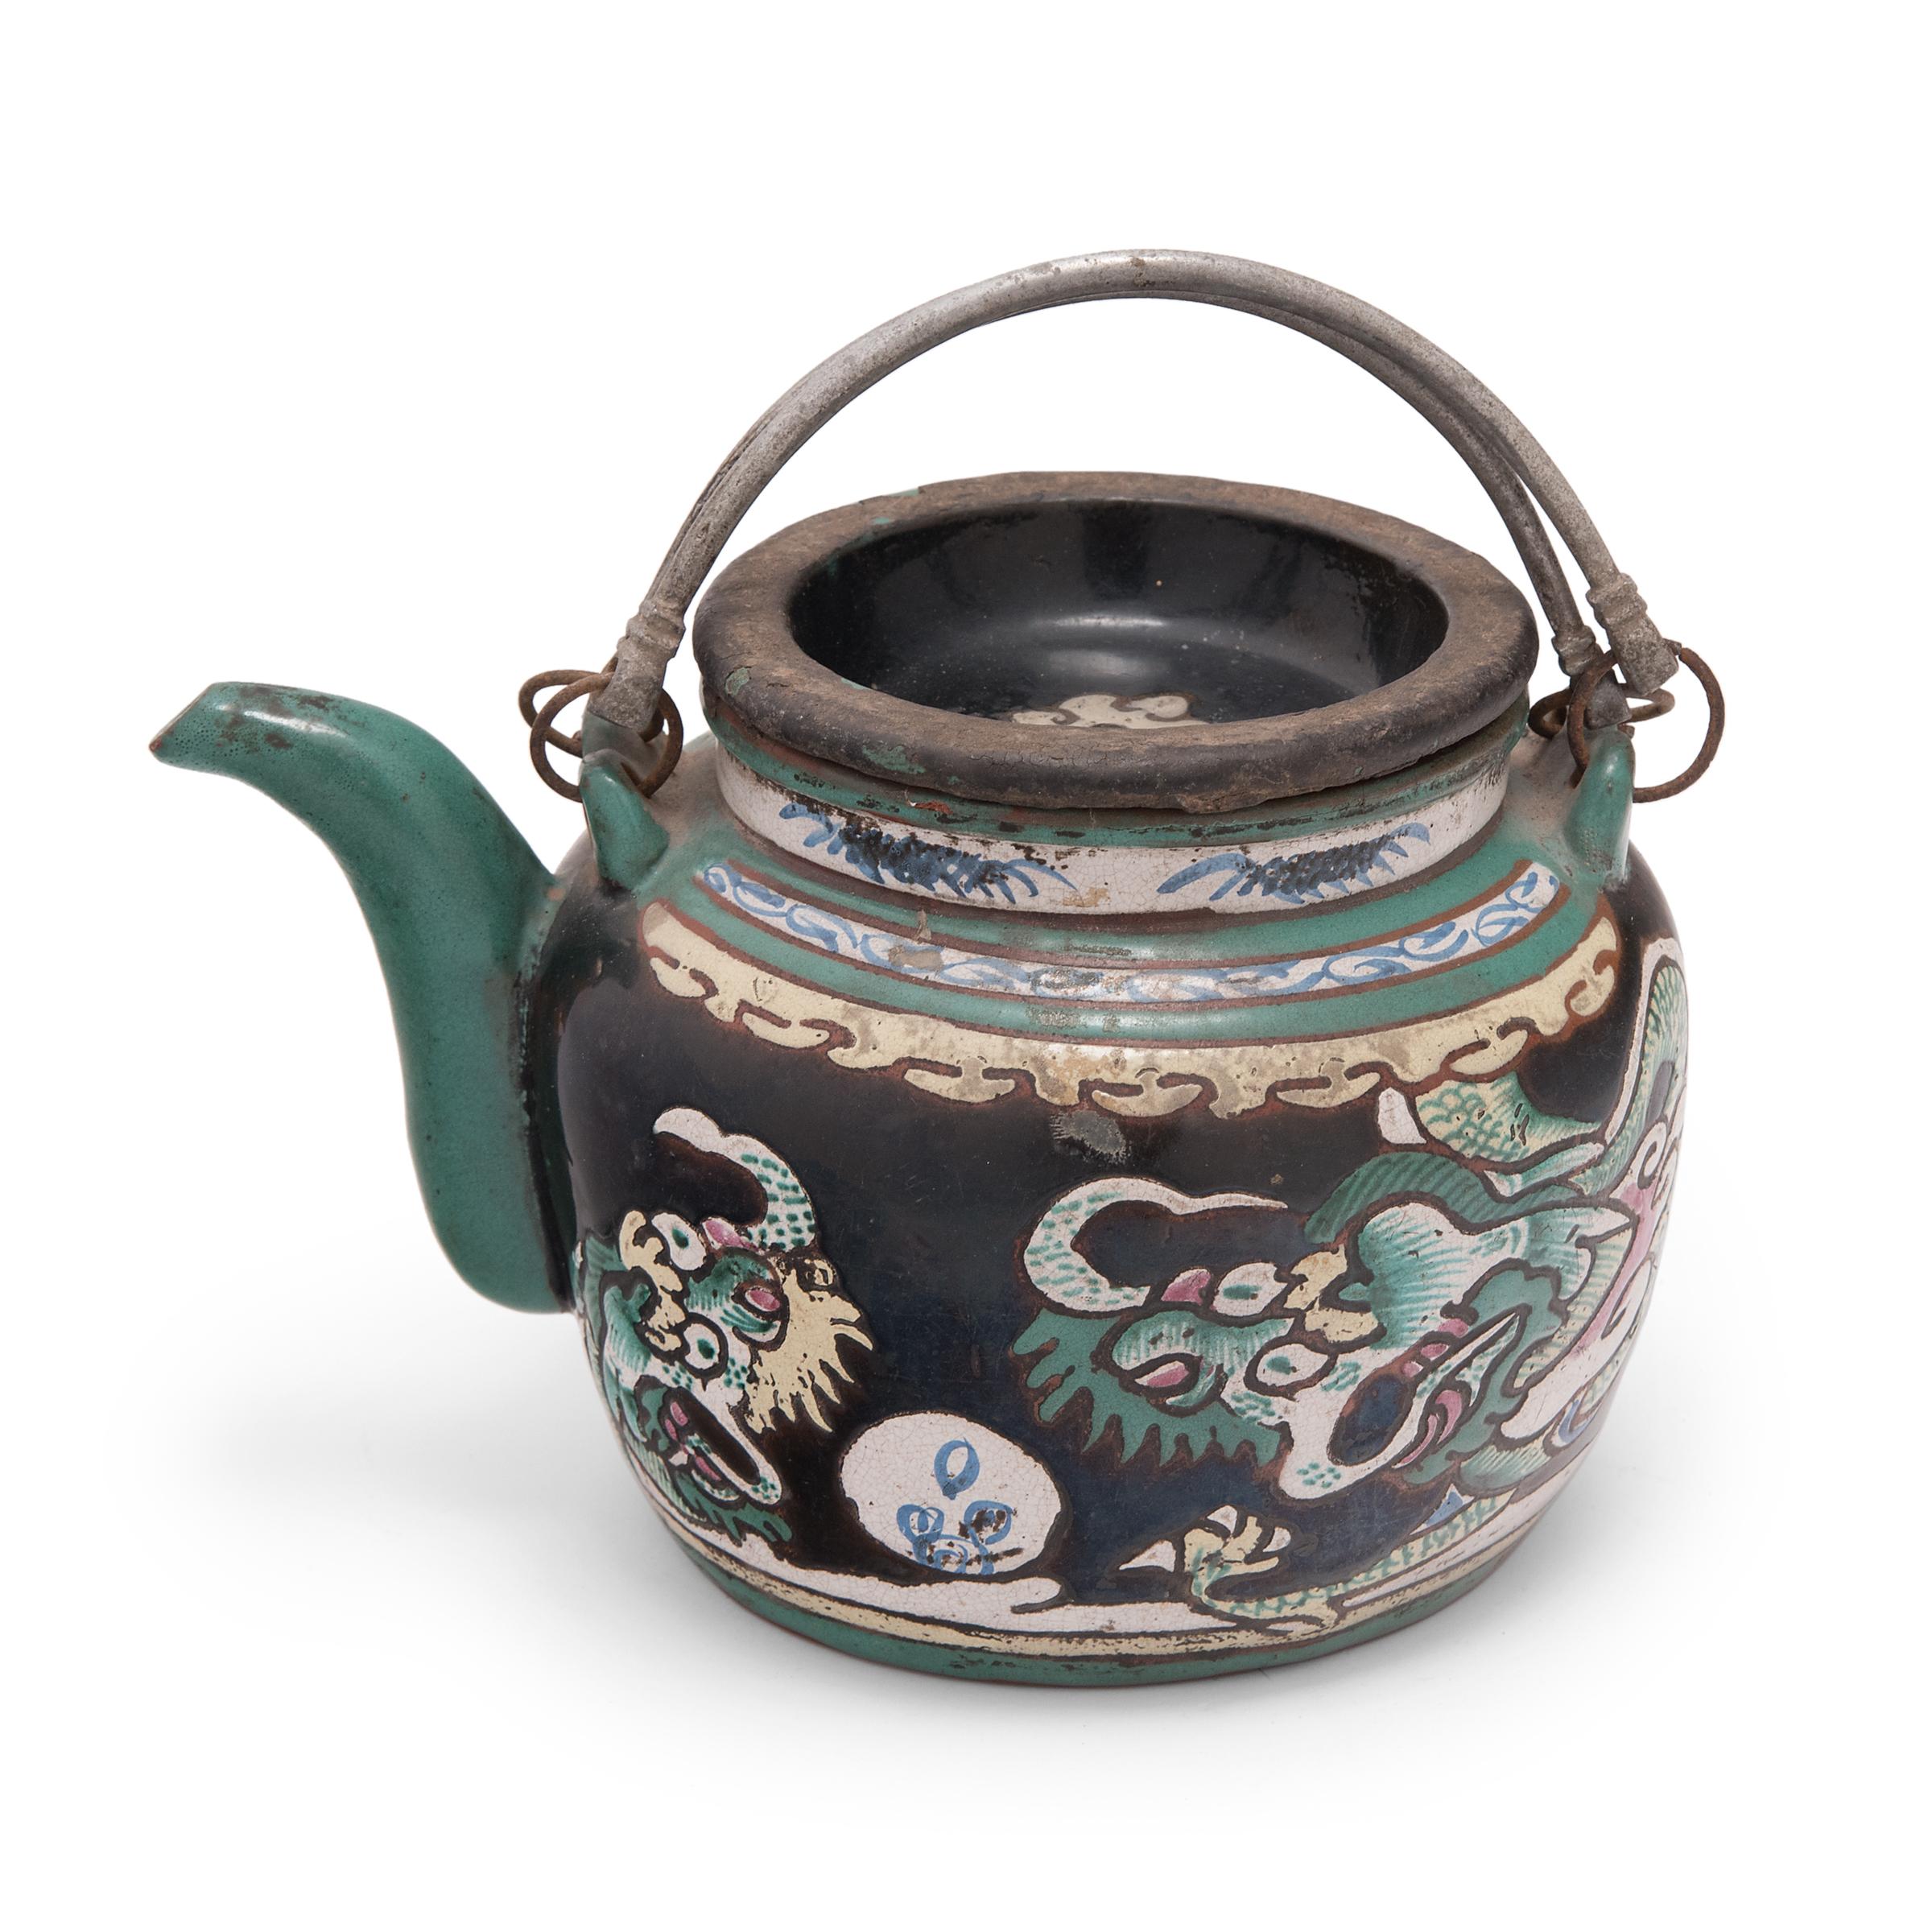 20th Century Chinese Enamelware Teapot with Twin Dragons, c. 1900 For Sale